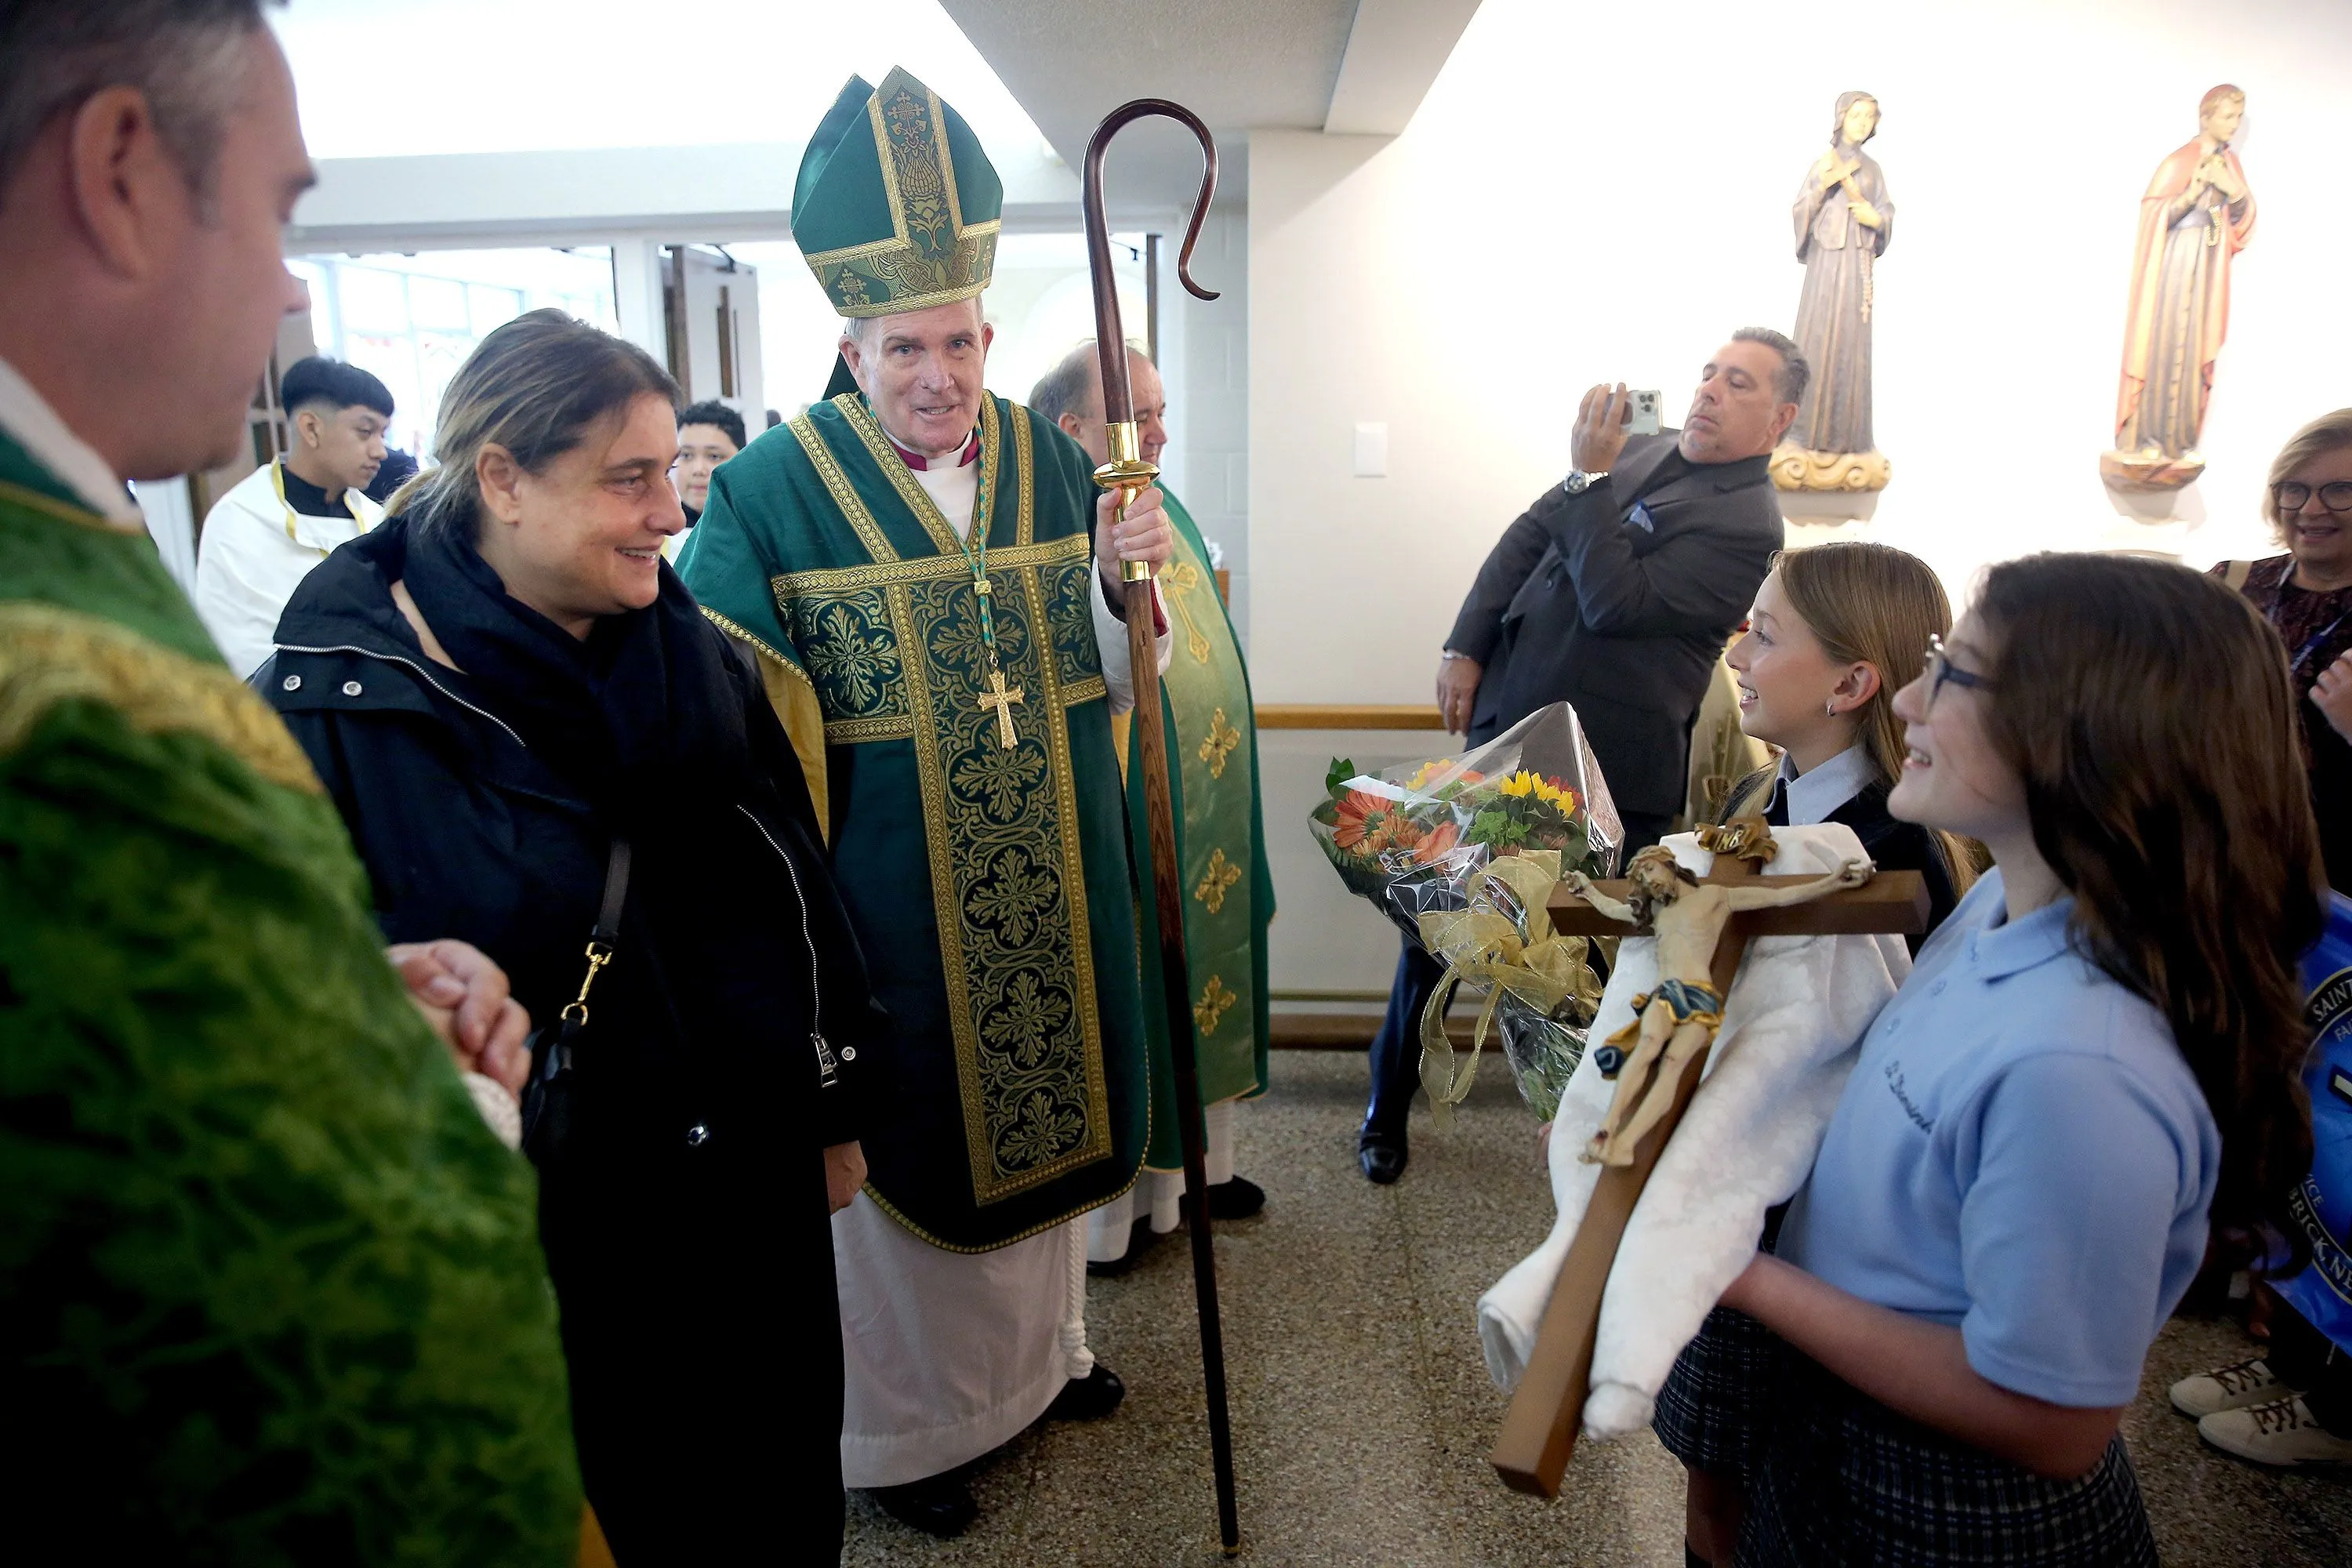 Antonia Salzano, Carlo Acutis' mother, and Bishop David O'Connell speak to schoolchildren at the blessing of the Carlo Acutis shrine at St. Dominic Parish in Brick, New Jersey. Oct 1, 2023.?w=200&h=150